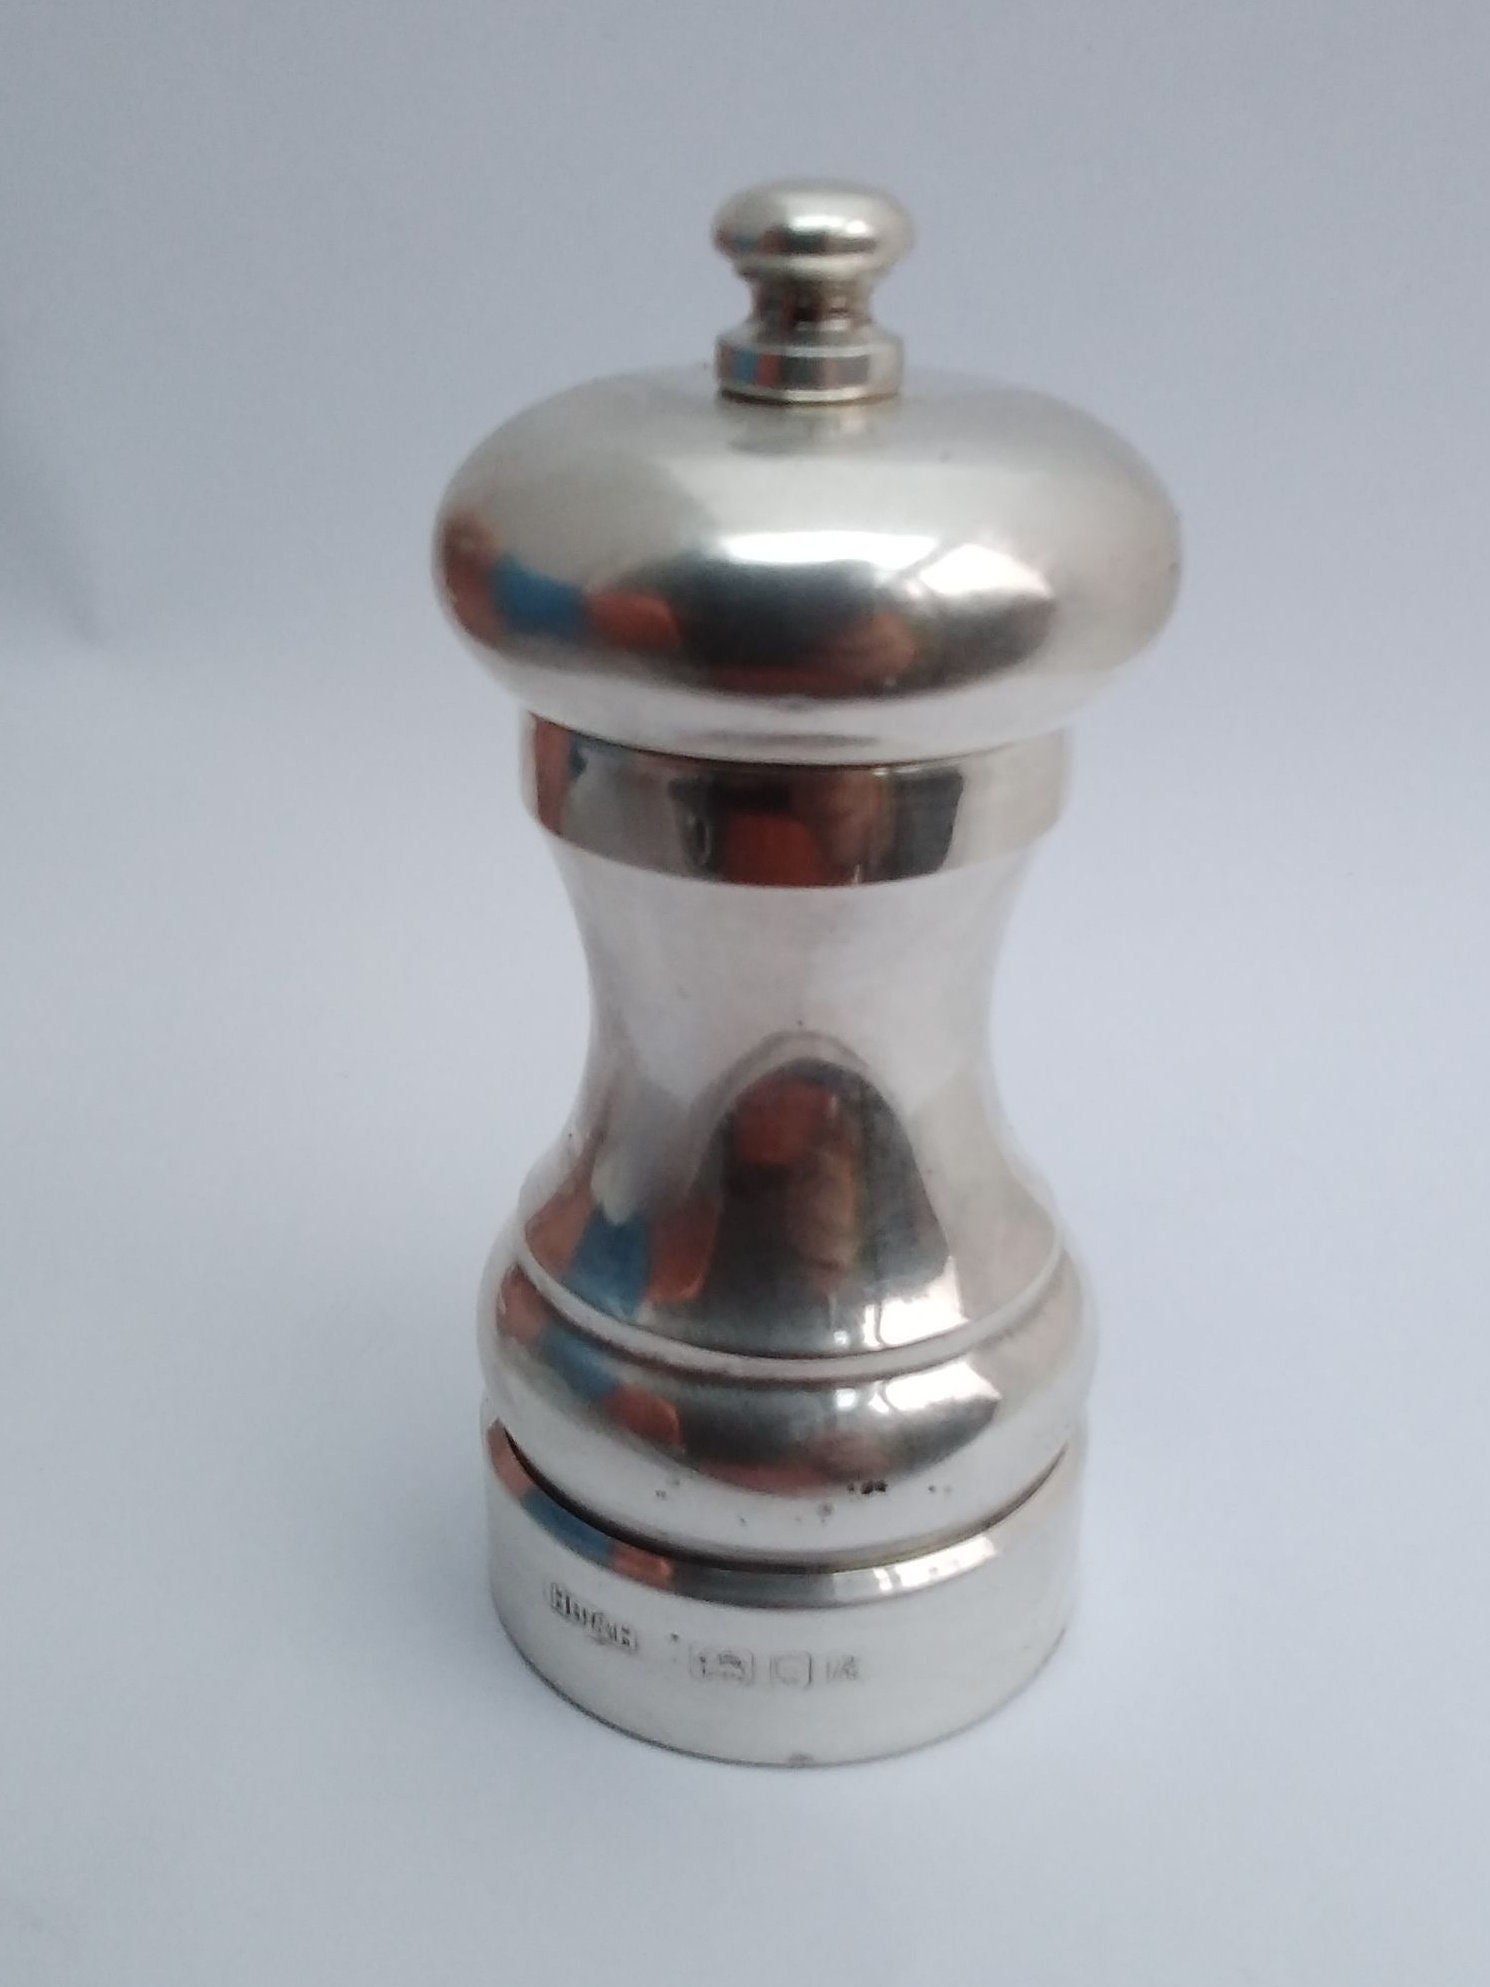 CARTIER BOREL STERLING SILVER AND WOOD LARGE PEPPER MILL sold at